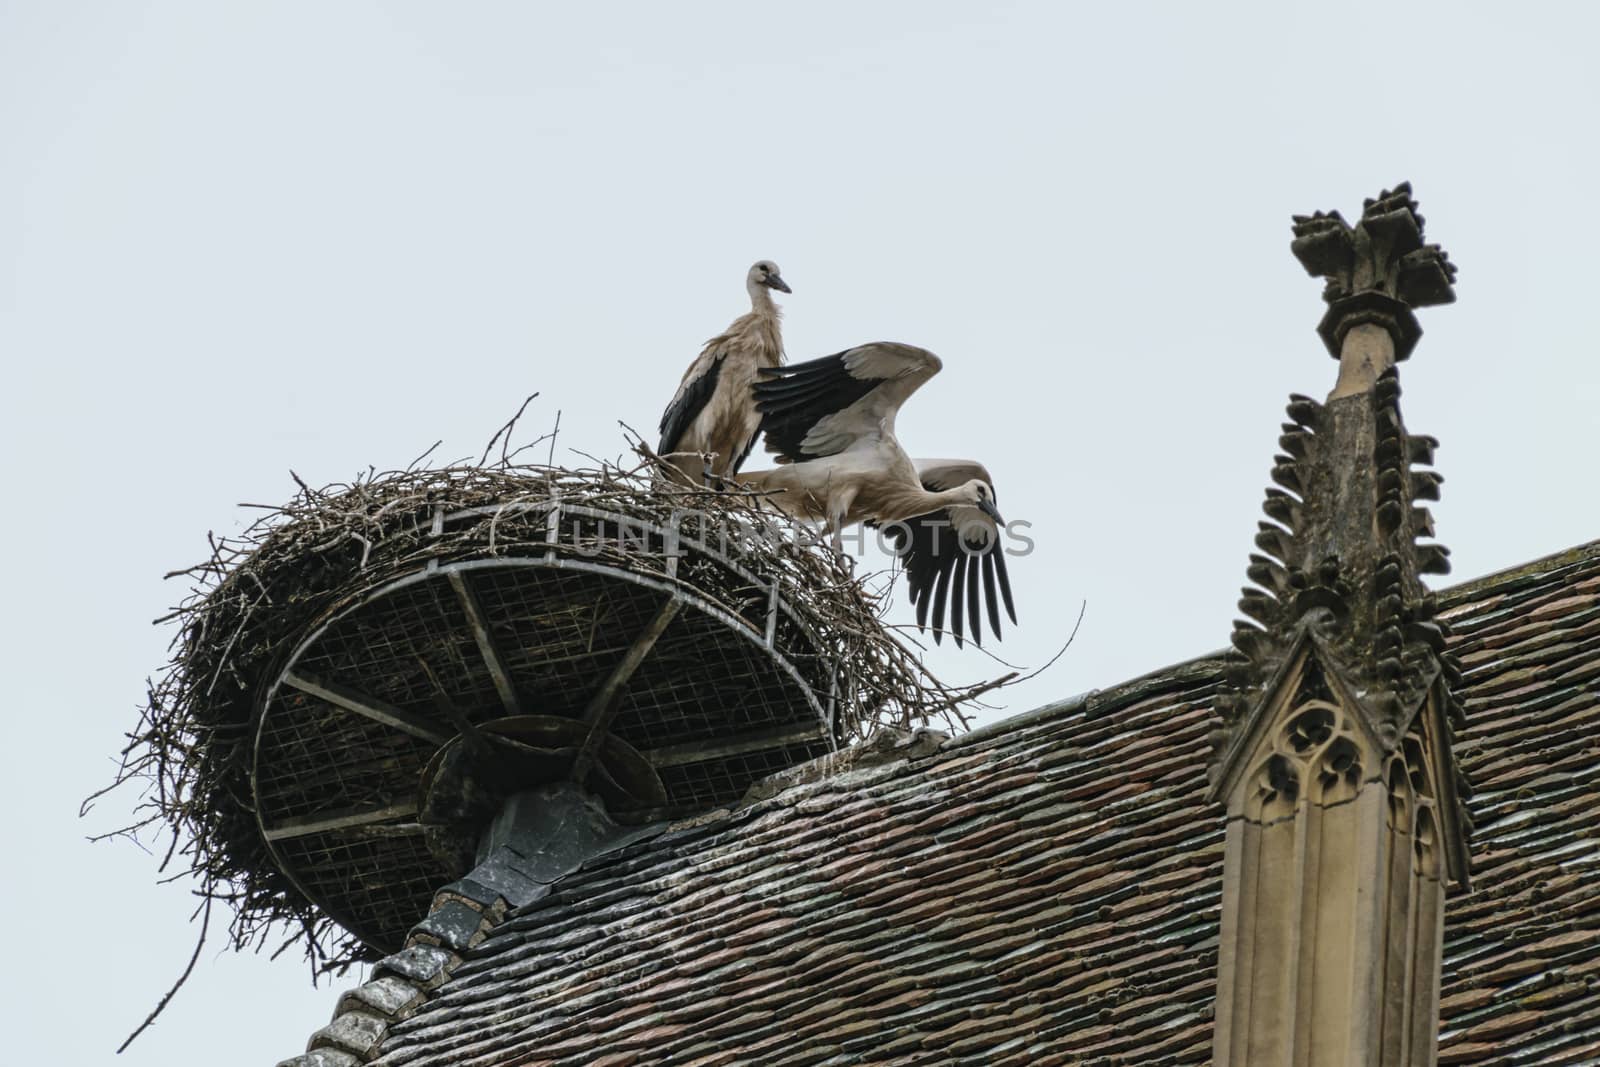 Storks nest on top of a chiurch tower in Colmar by mrs_vision